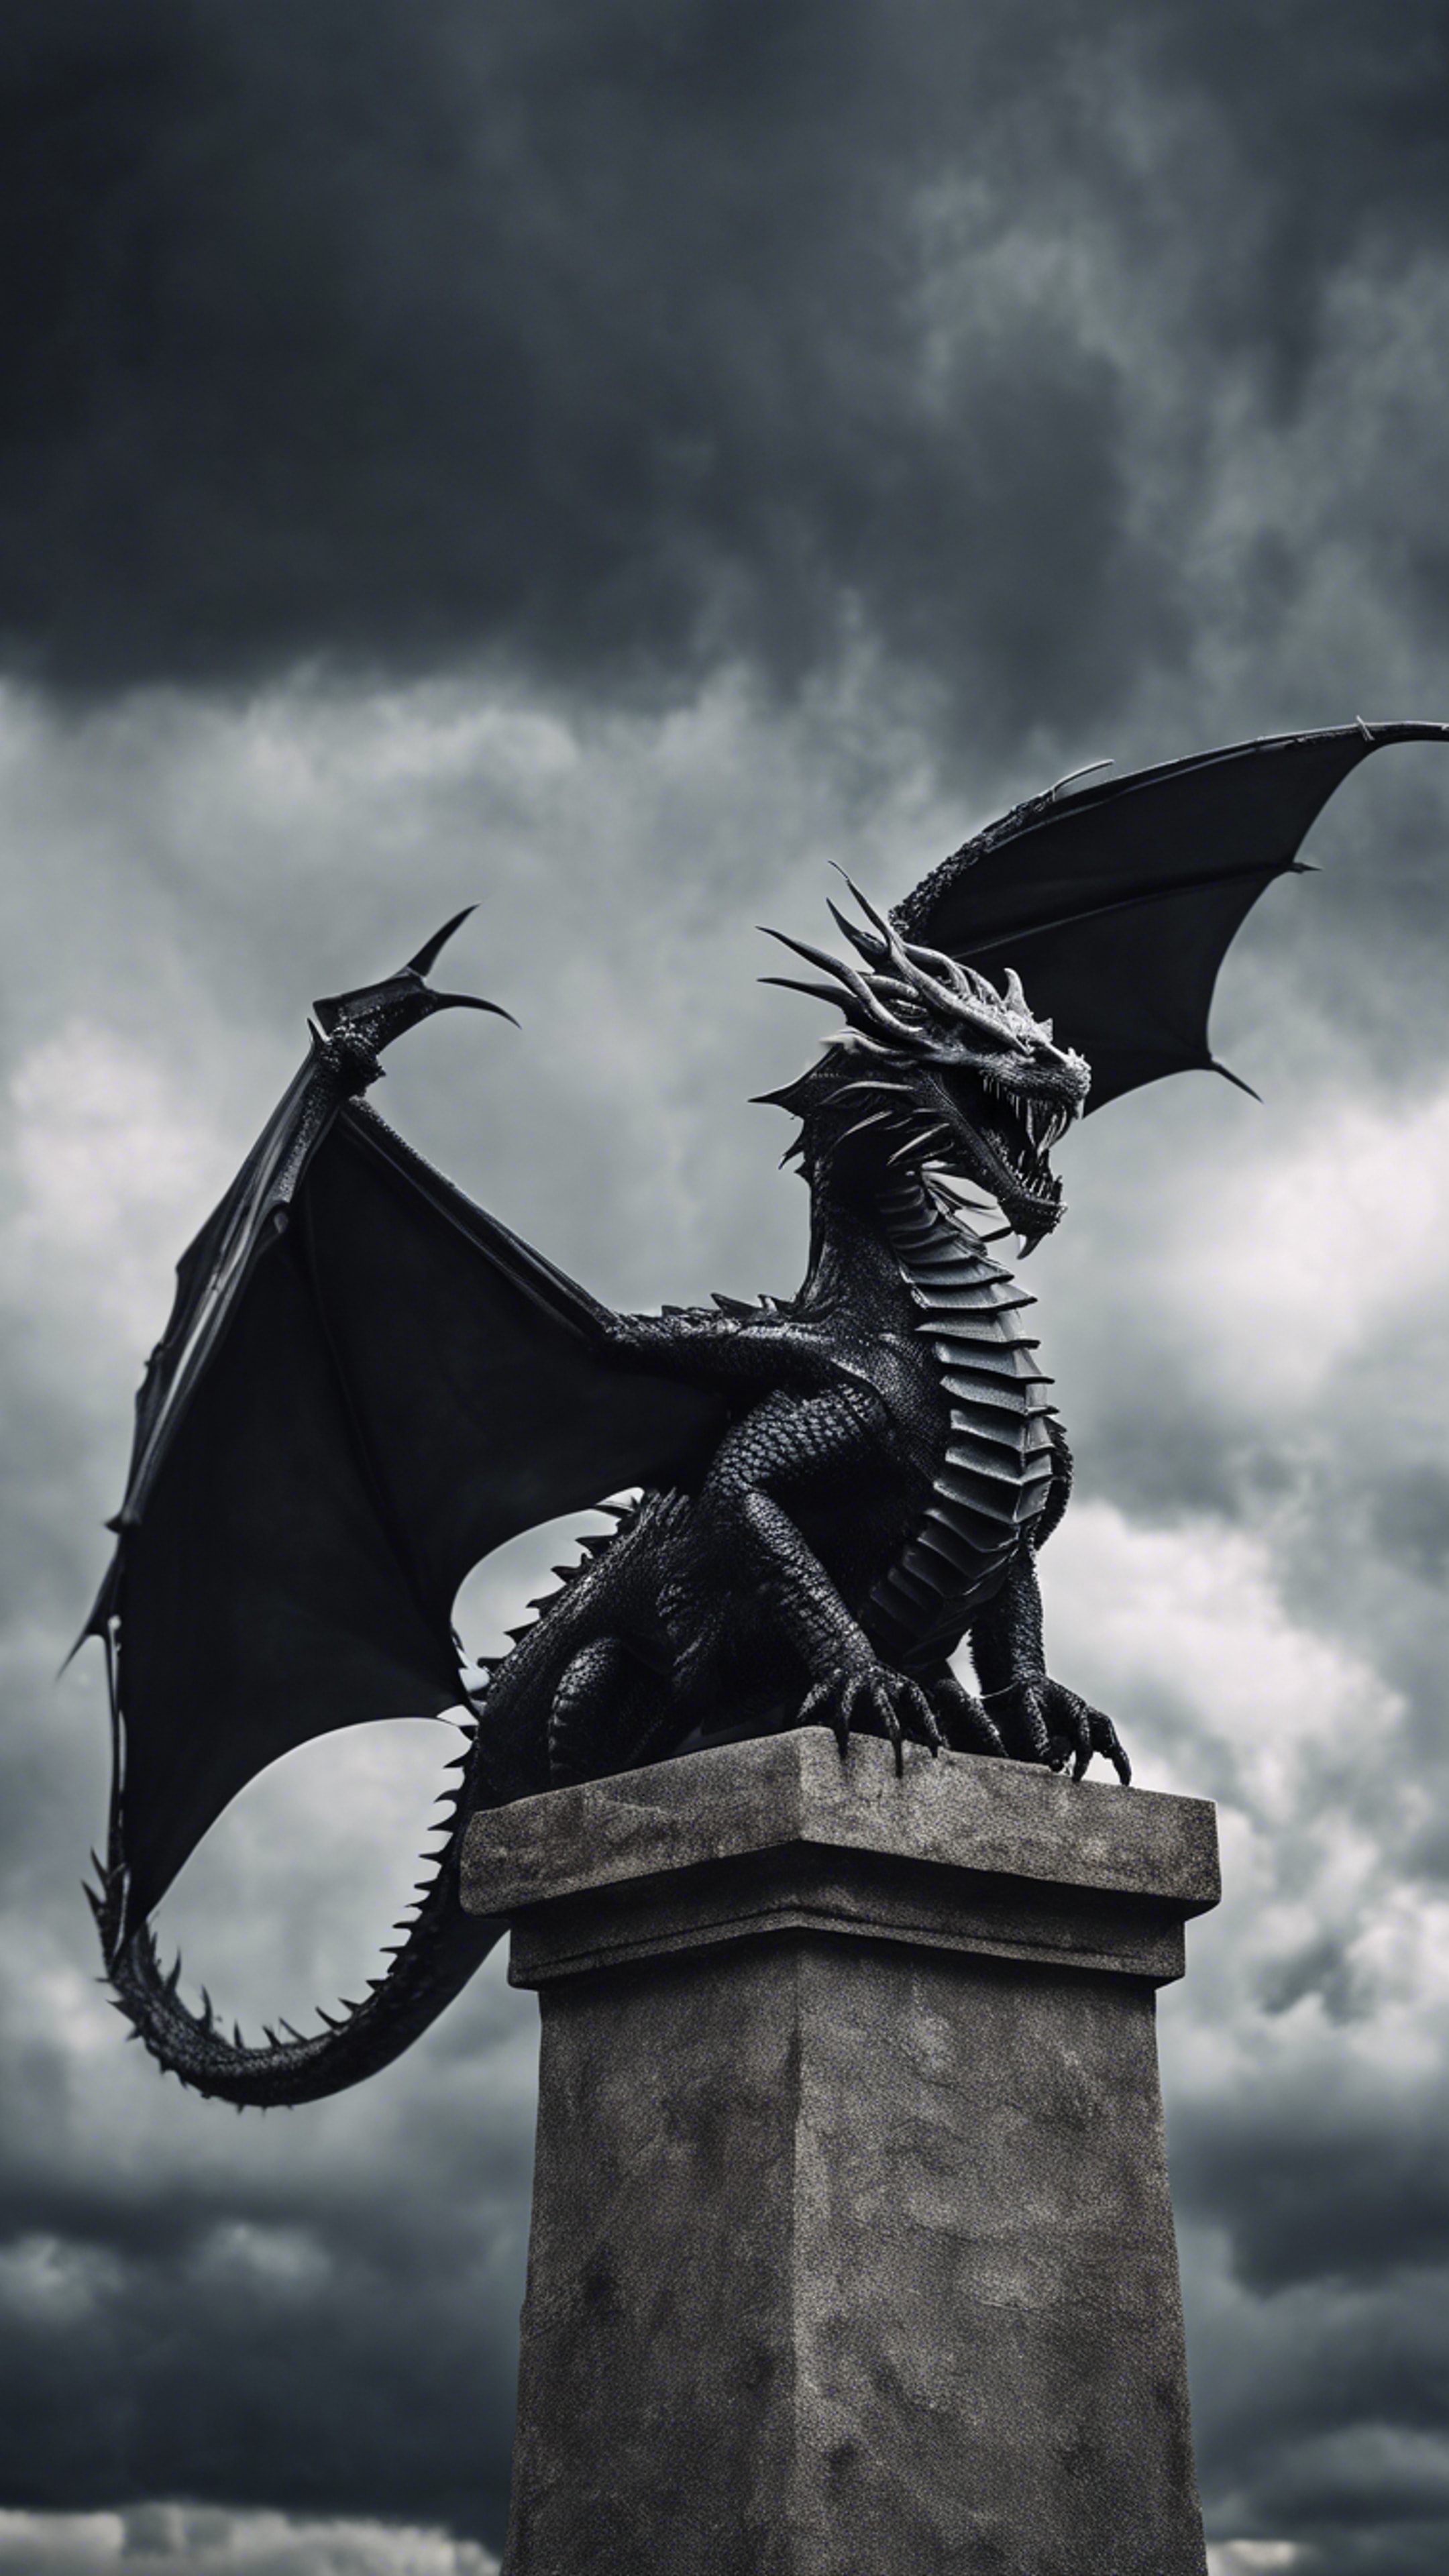 A gothic-style, black iron dragon flying amidst stormy, dark clouds. Tapeta[aebeaee8cf654a26baba]